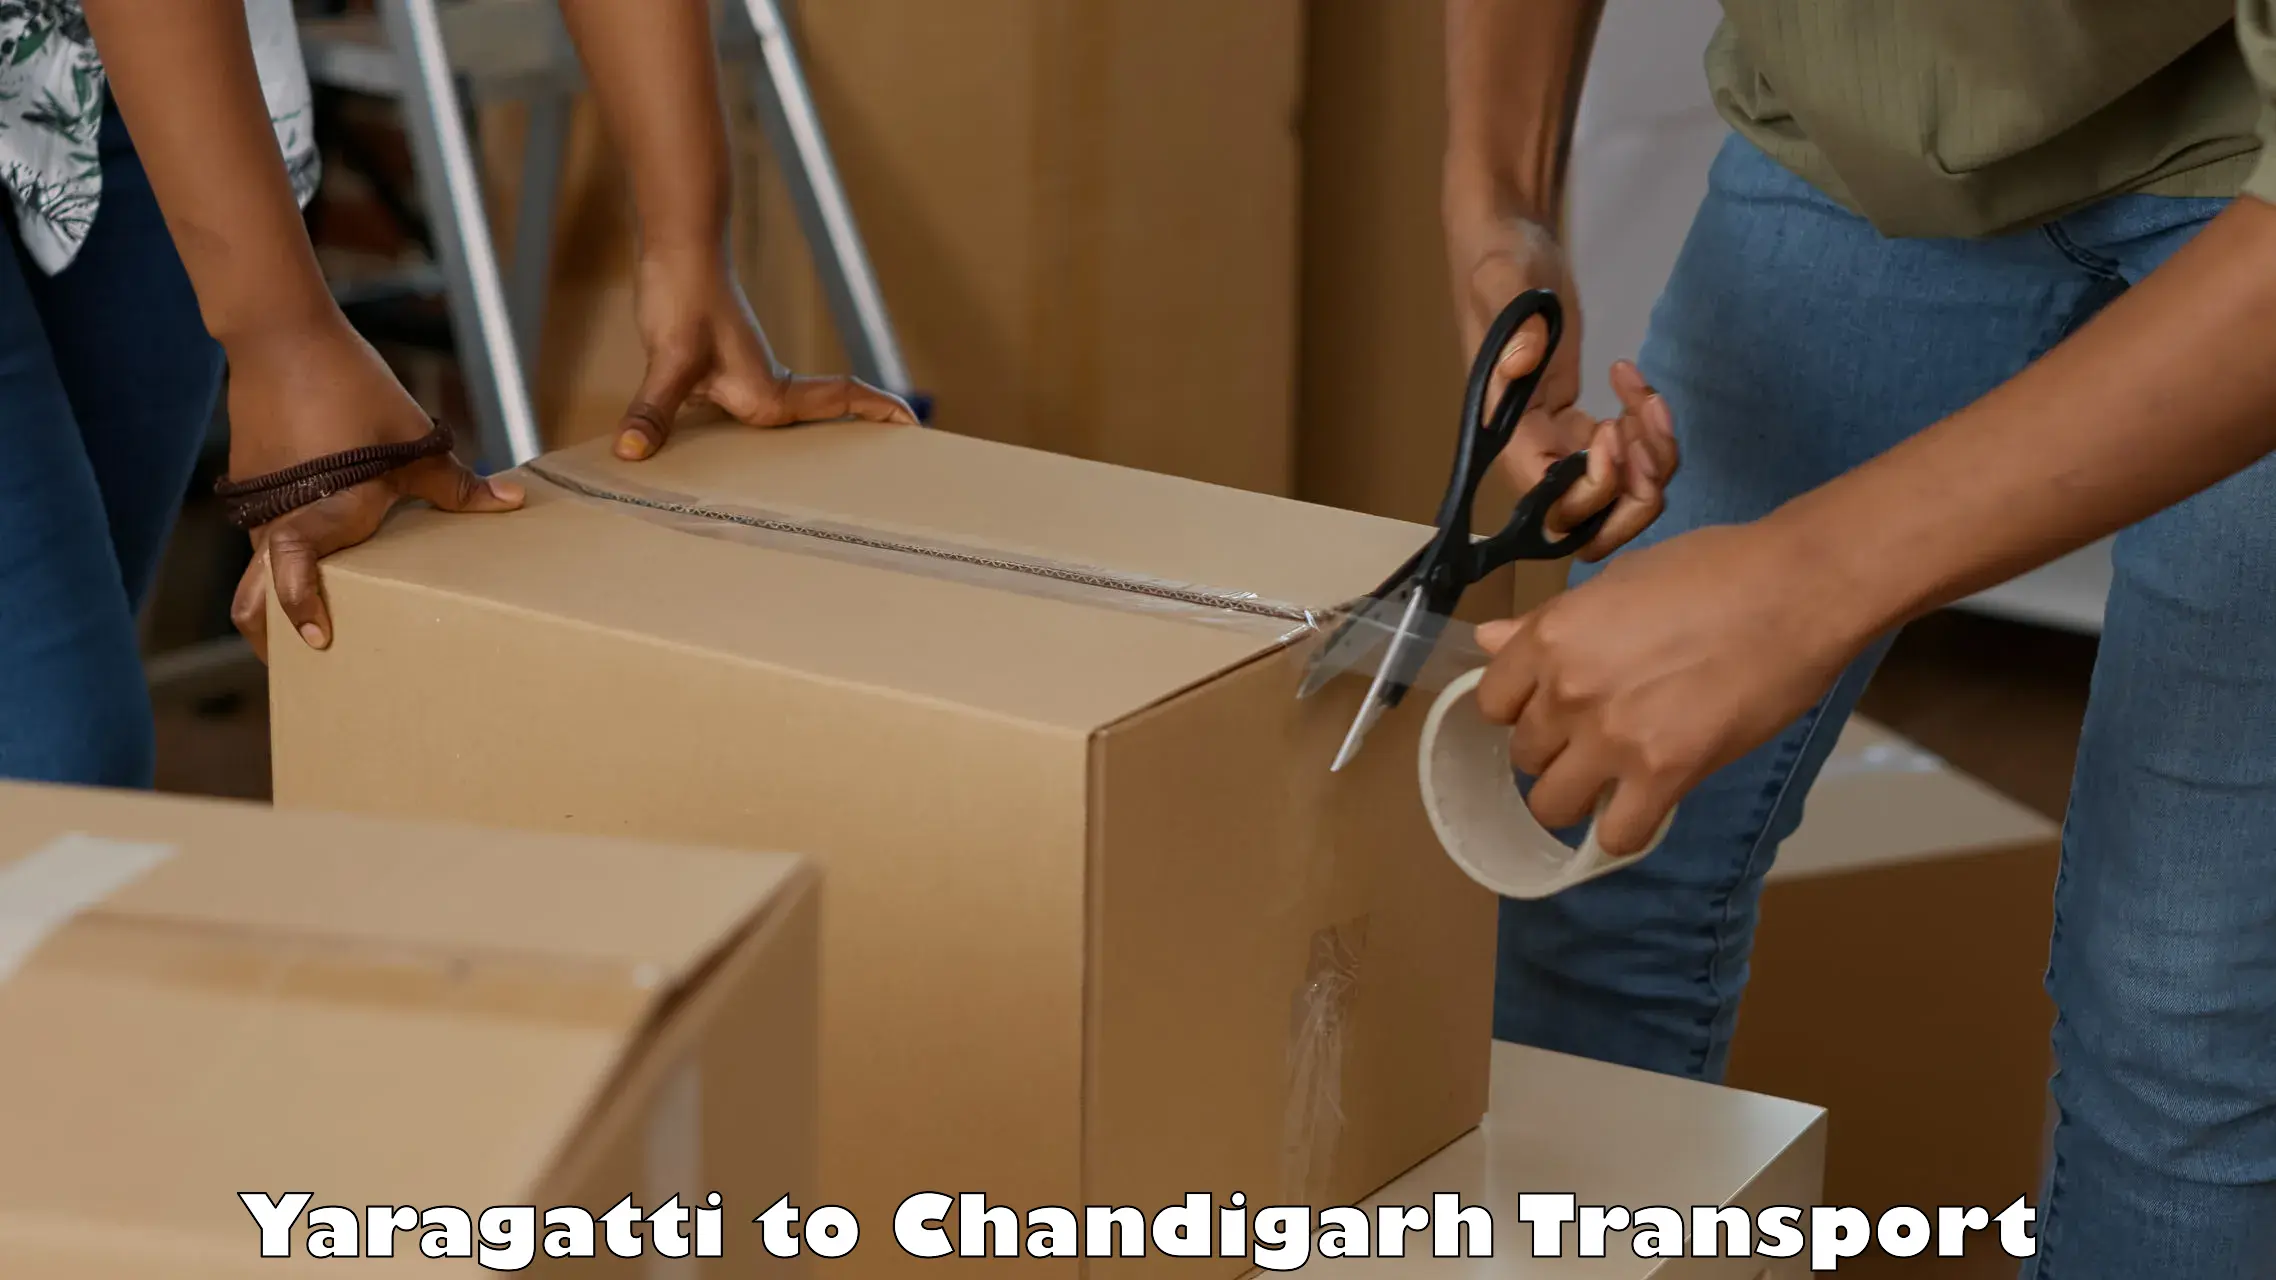 Commercial transport service Yaragatti to Chandigarh